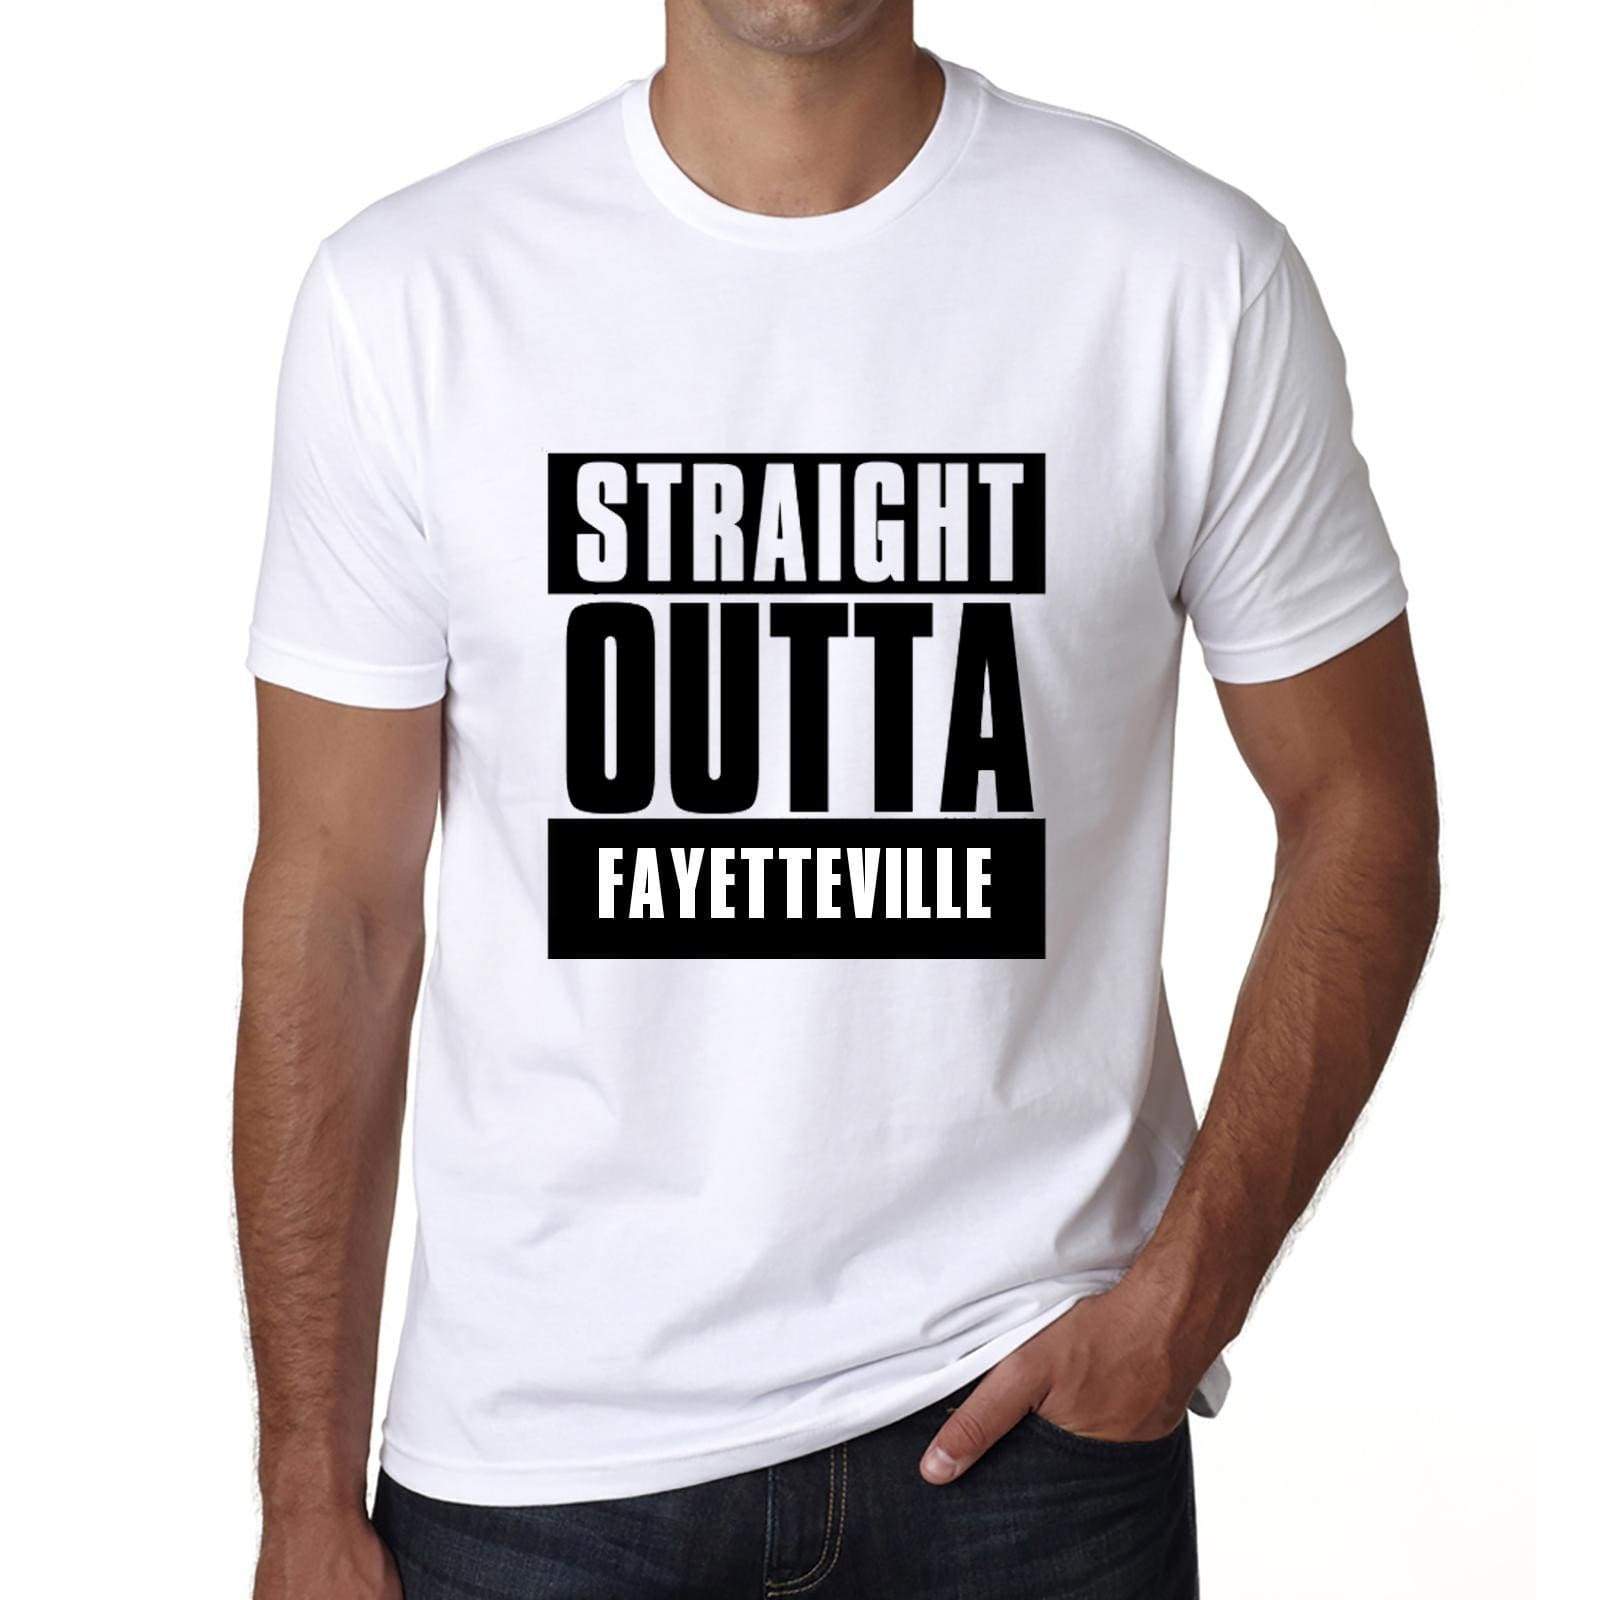 Straight Outta Fayetteville Mens Short Sleeve Round Neck T-Shirt 00027 - White / S - Casual